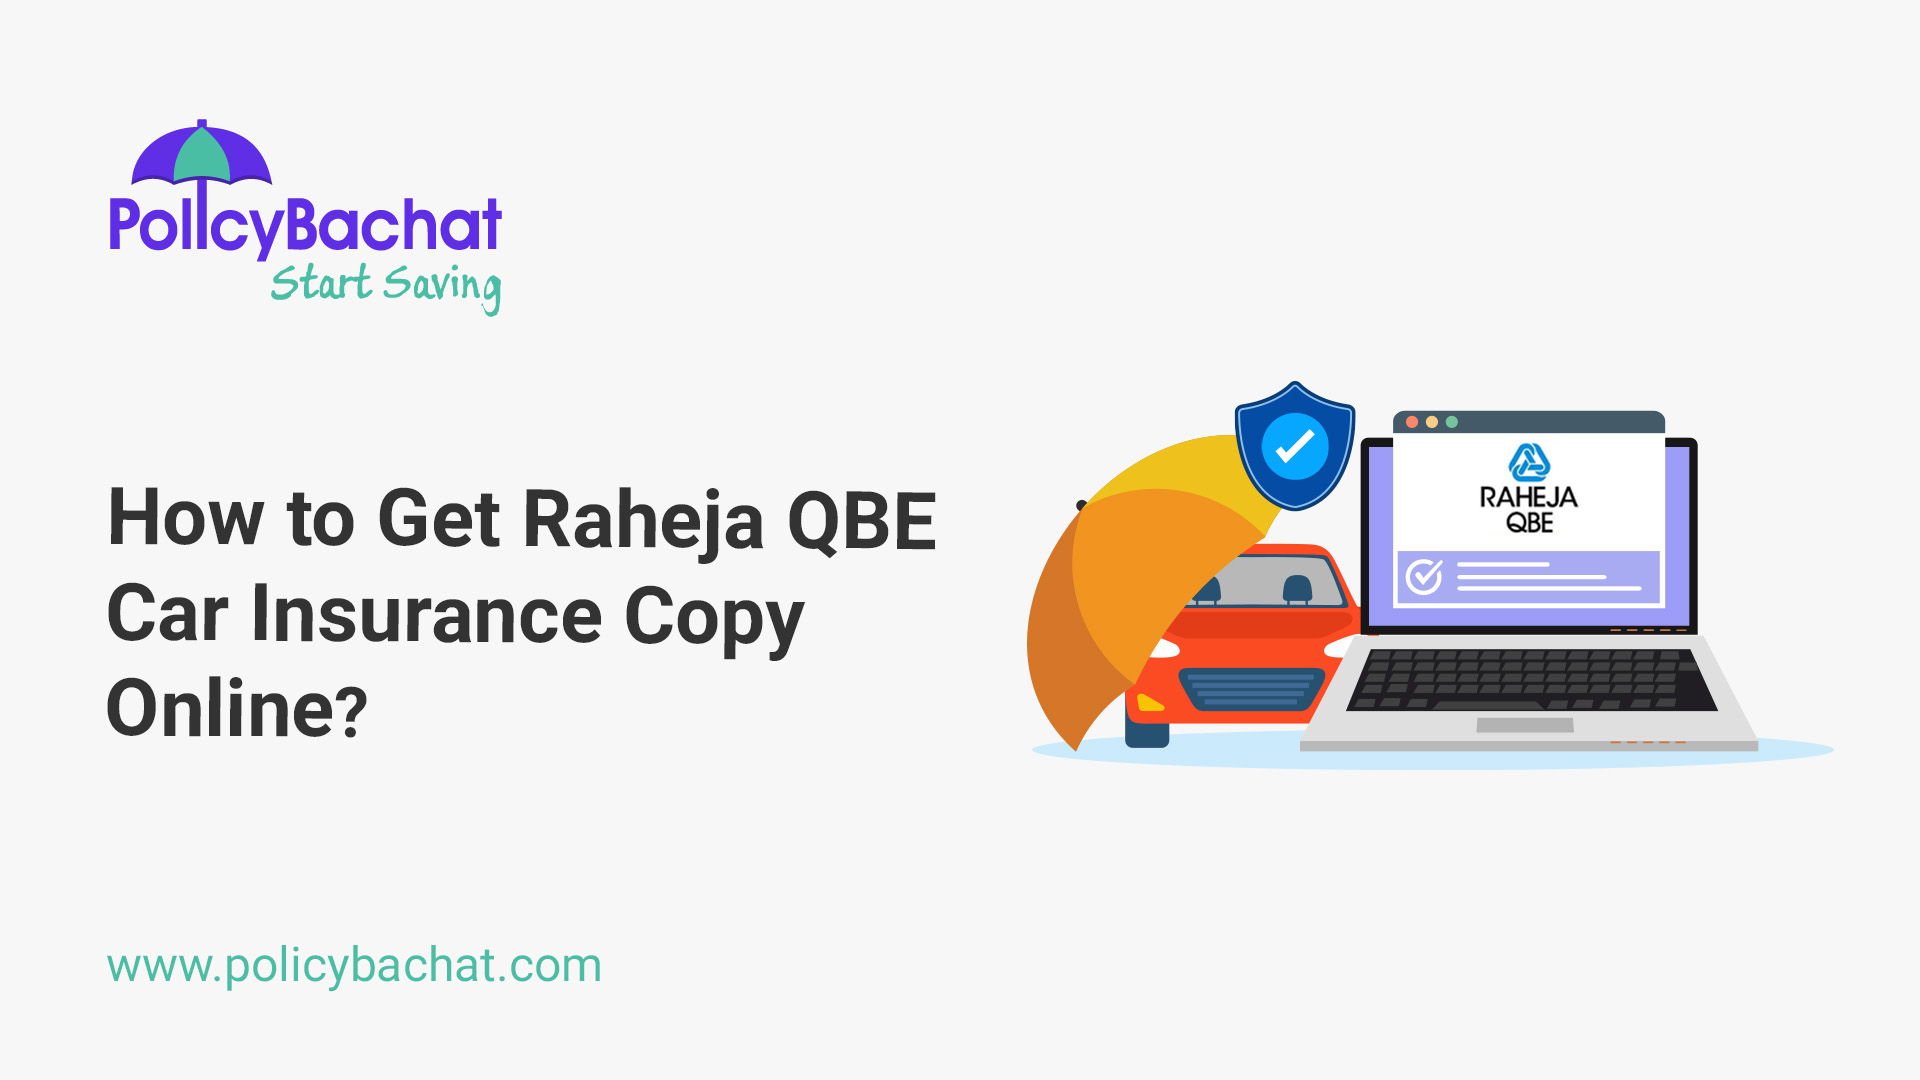 How to Get Raheja QBE Car Insurance Copy Online? - PolicyBachat